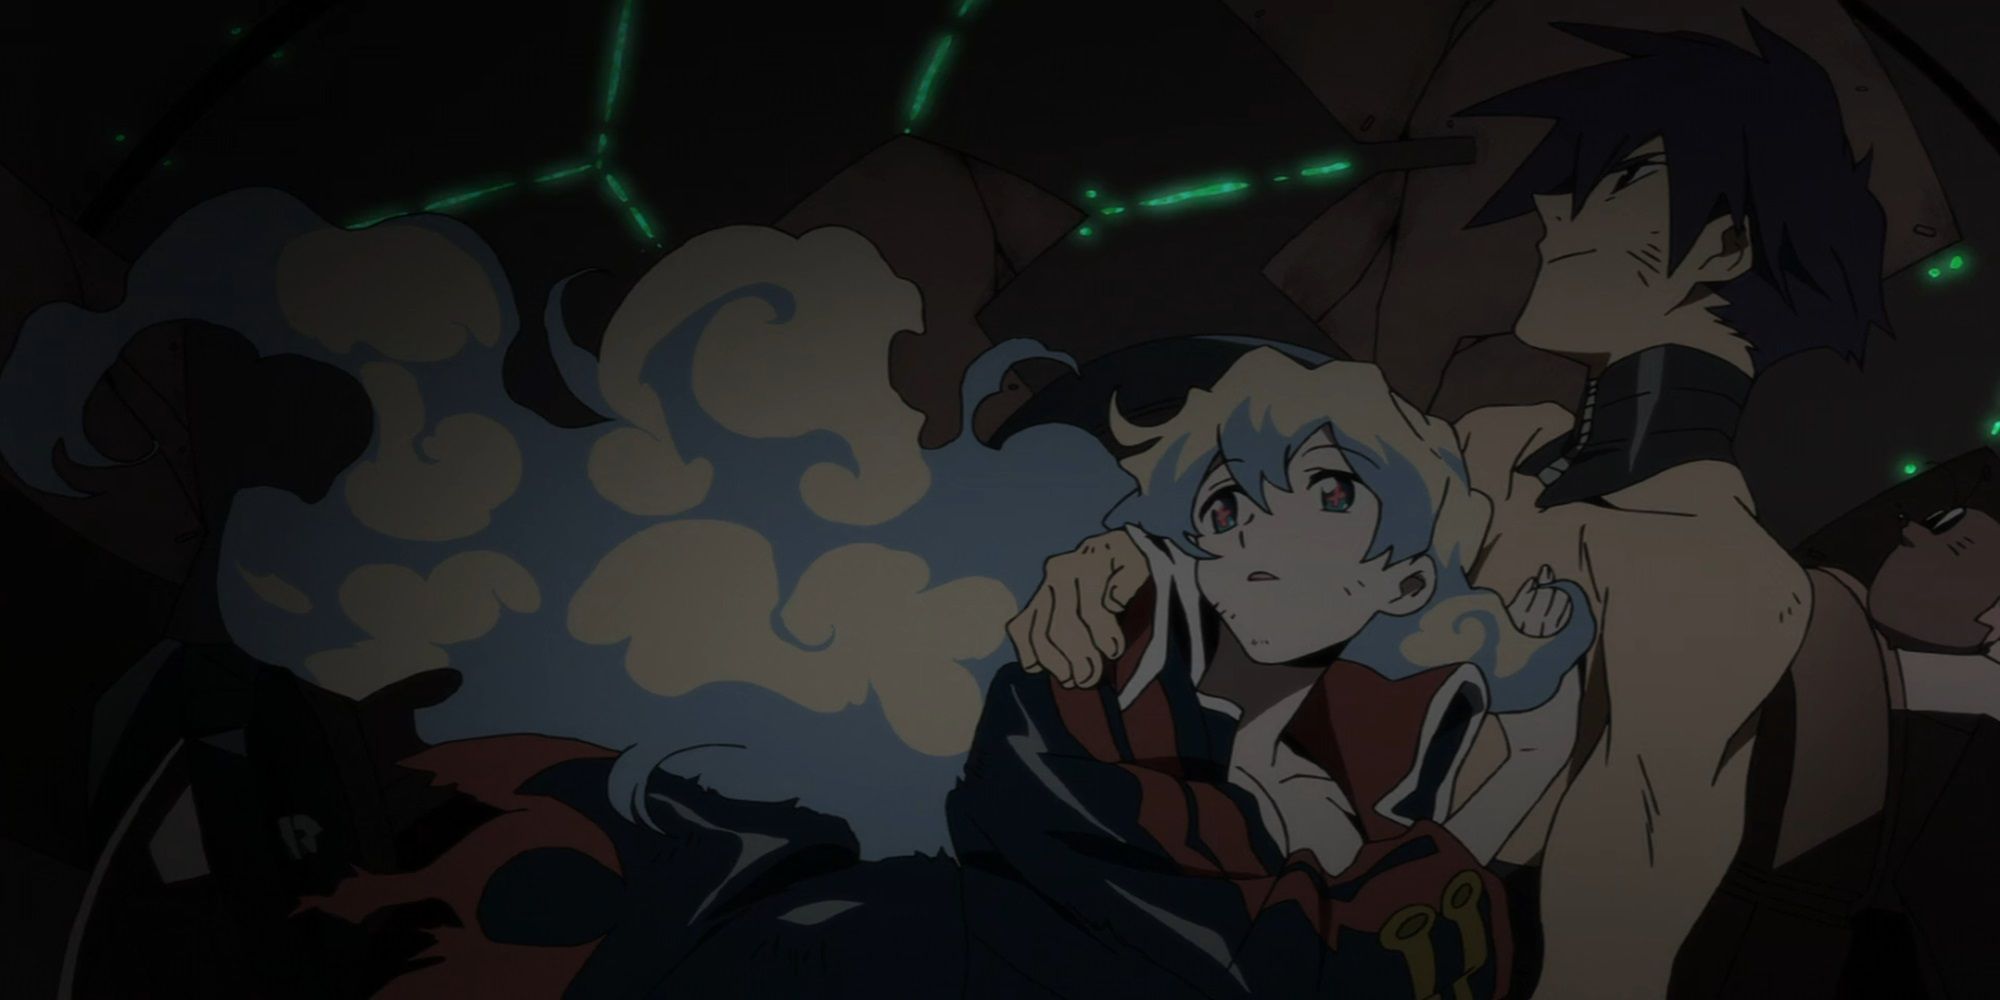 Gurren Lagann Movie 2 screen cap of Simon and Nia holding one another.